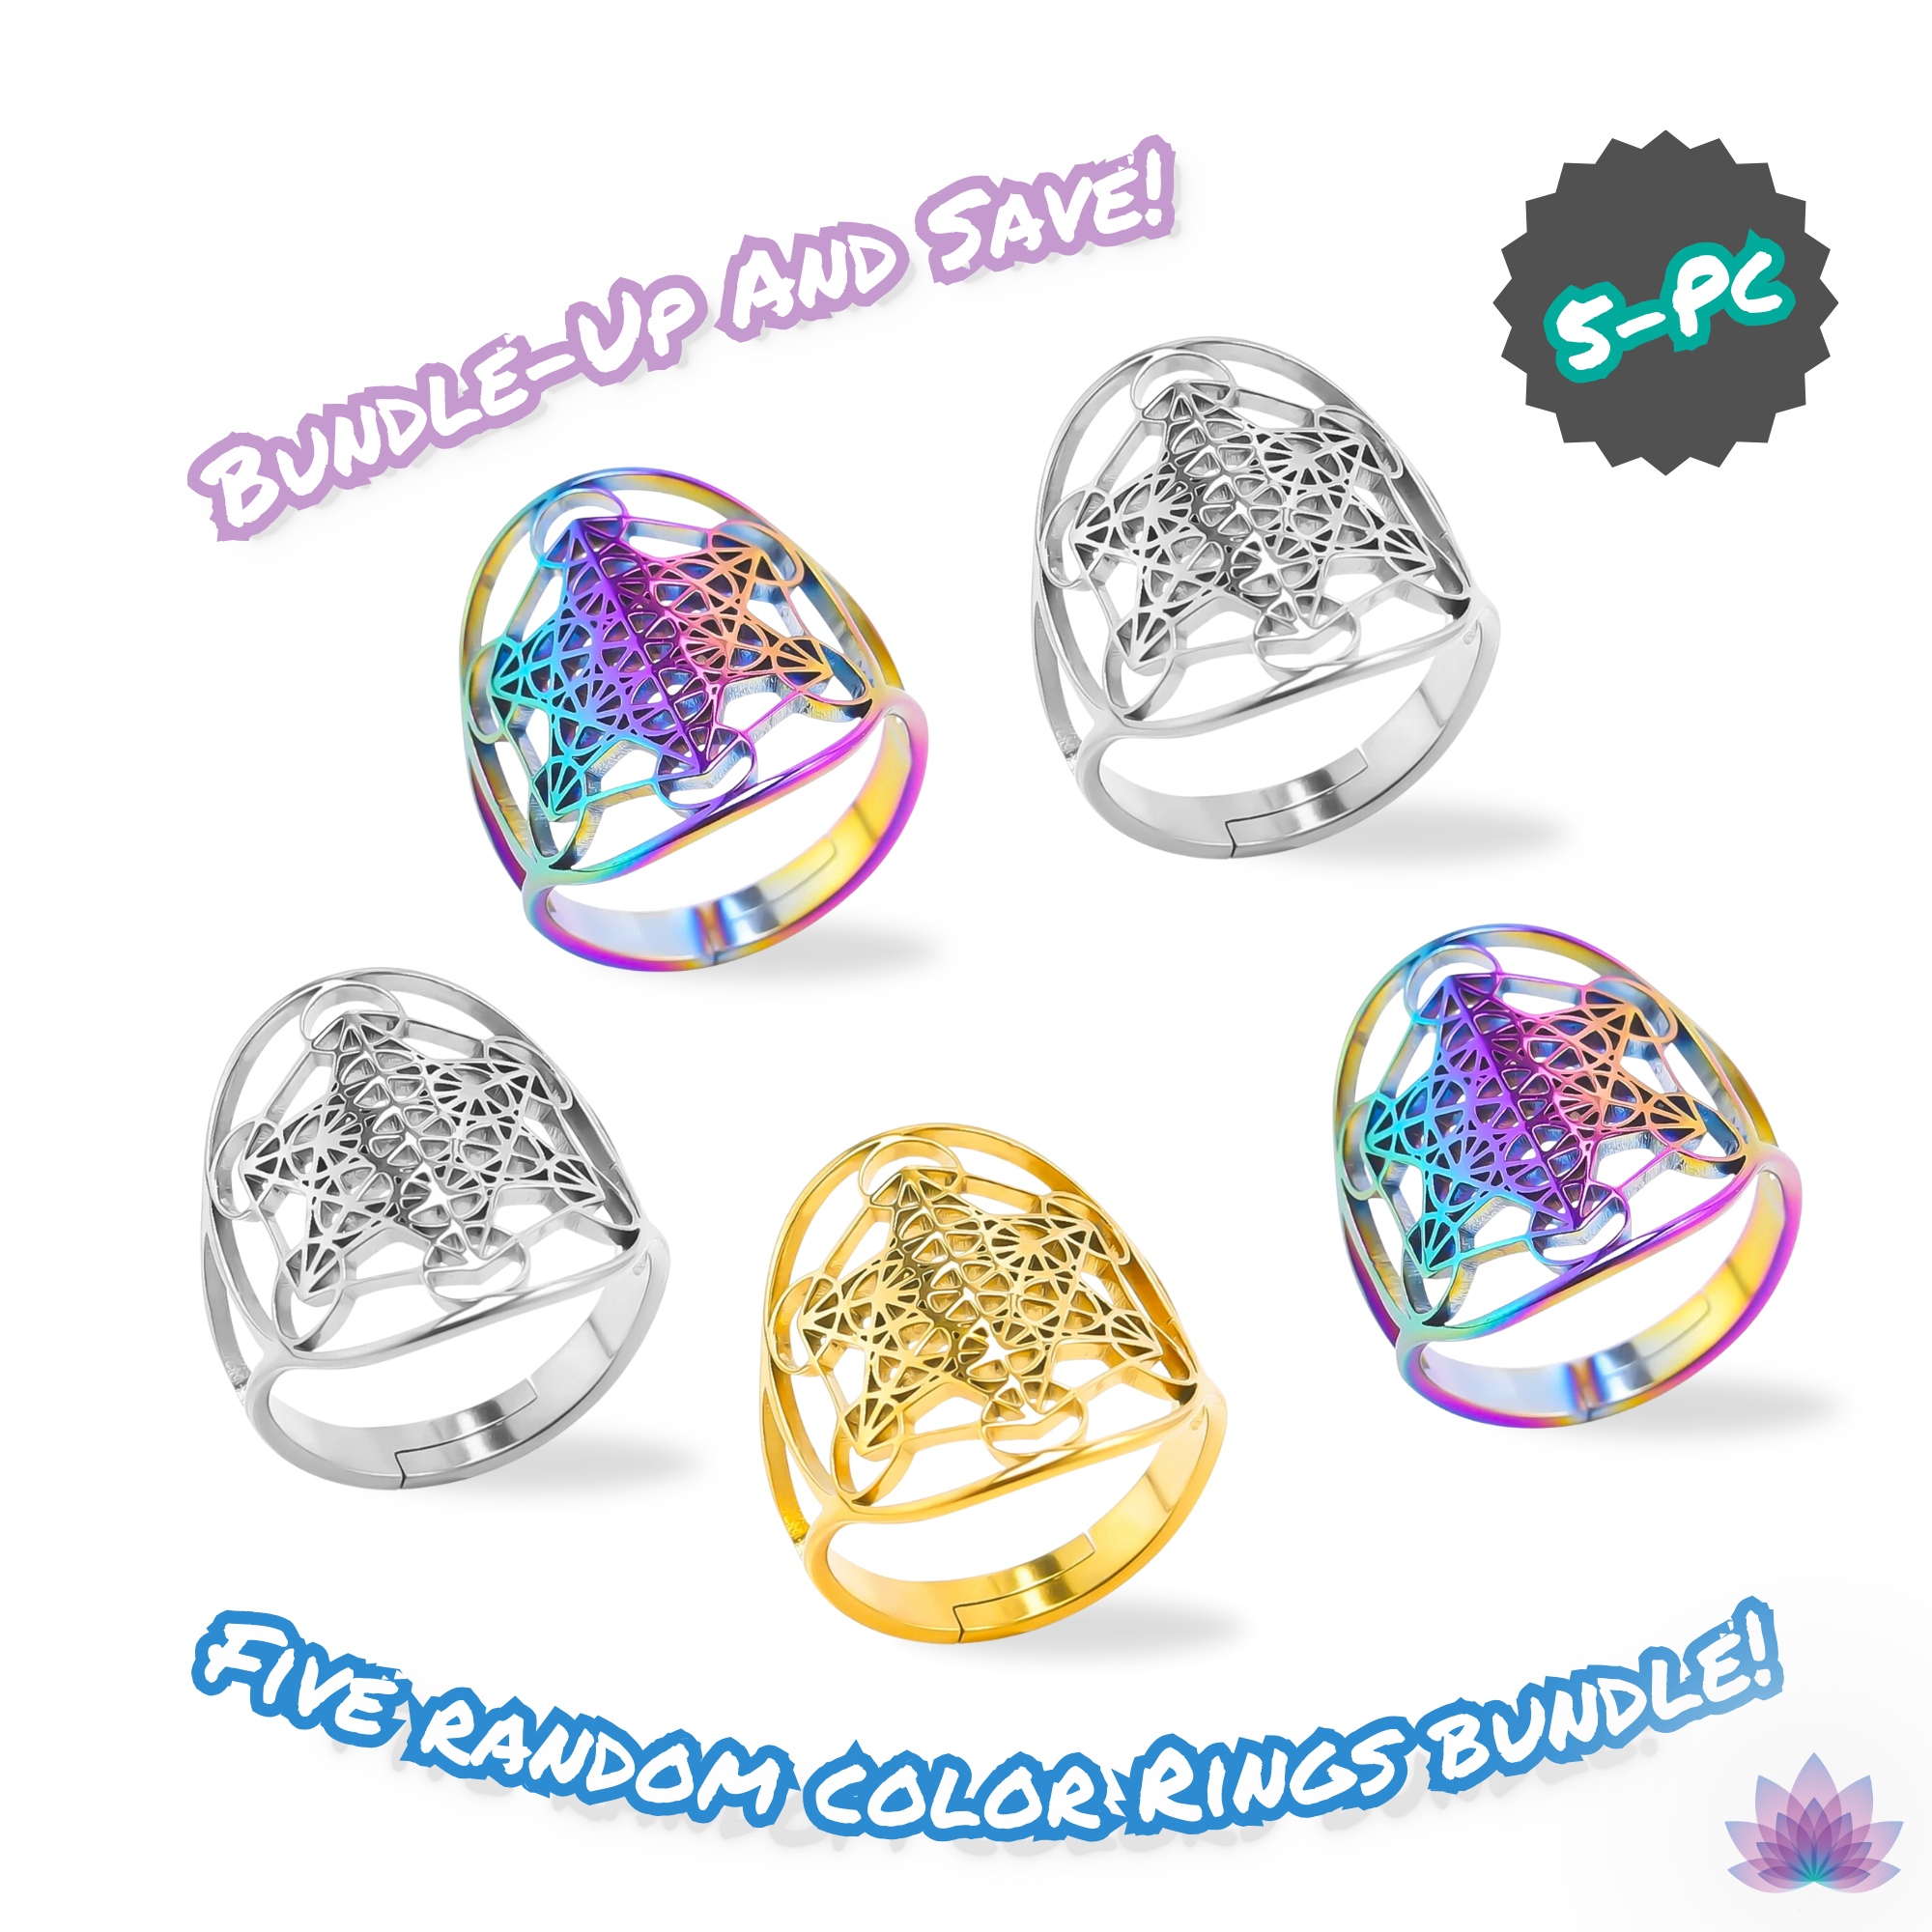 Archangel Metatron Cube Ring 5-pc Bundle • Witchy Silver-Gold-Rainbow Adjustable Occult Magick Jewelry • Five Sacred Geometry Rings Set • Apollo Tarot Shop